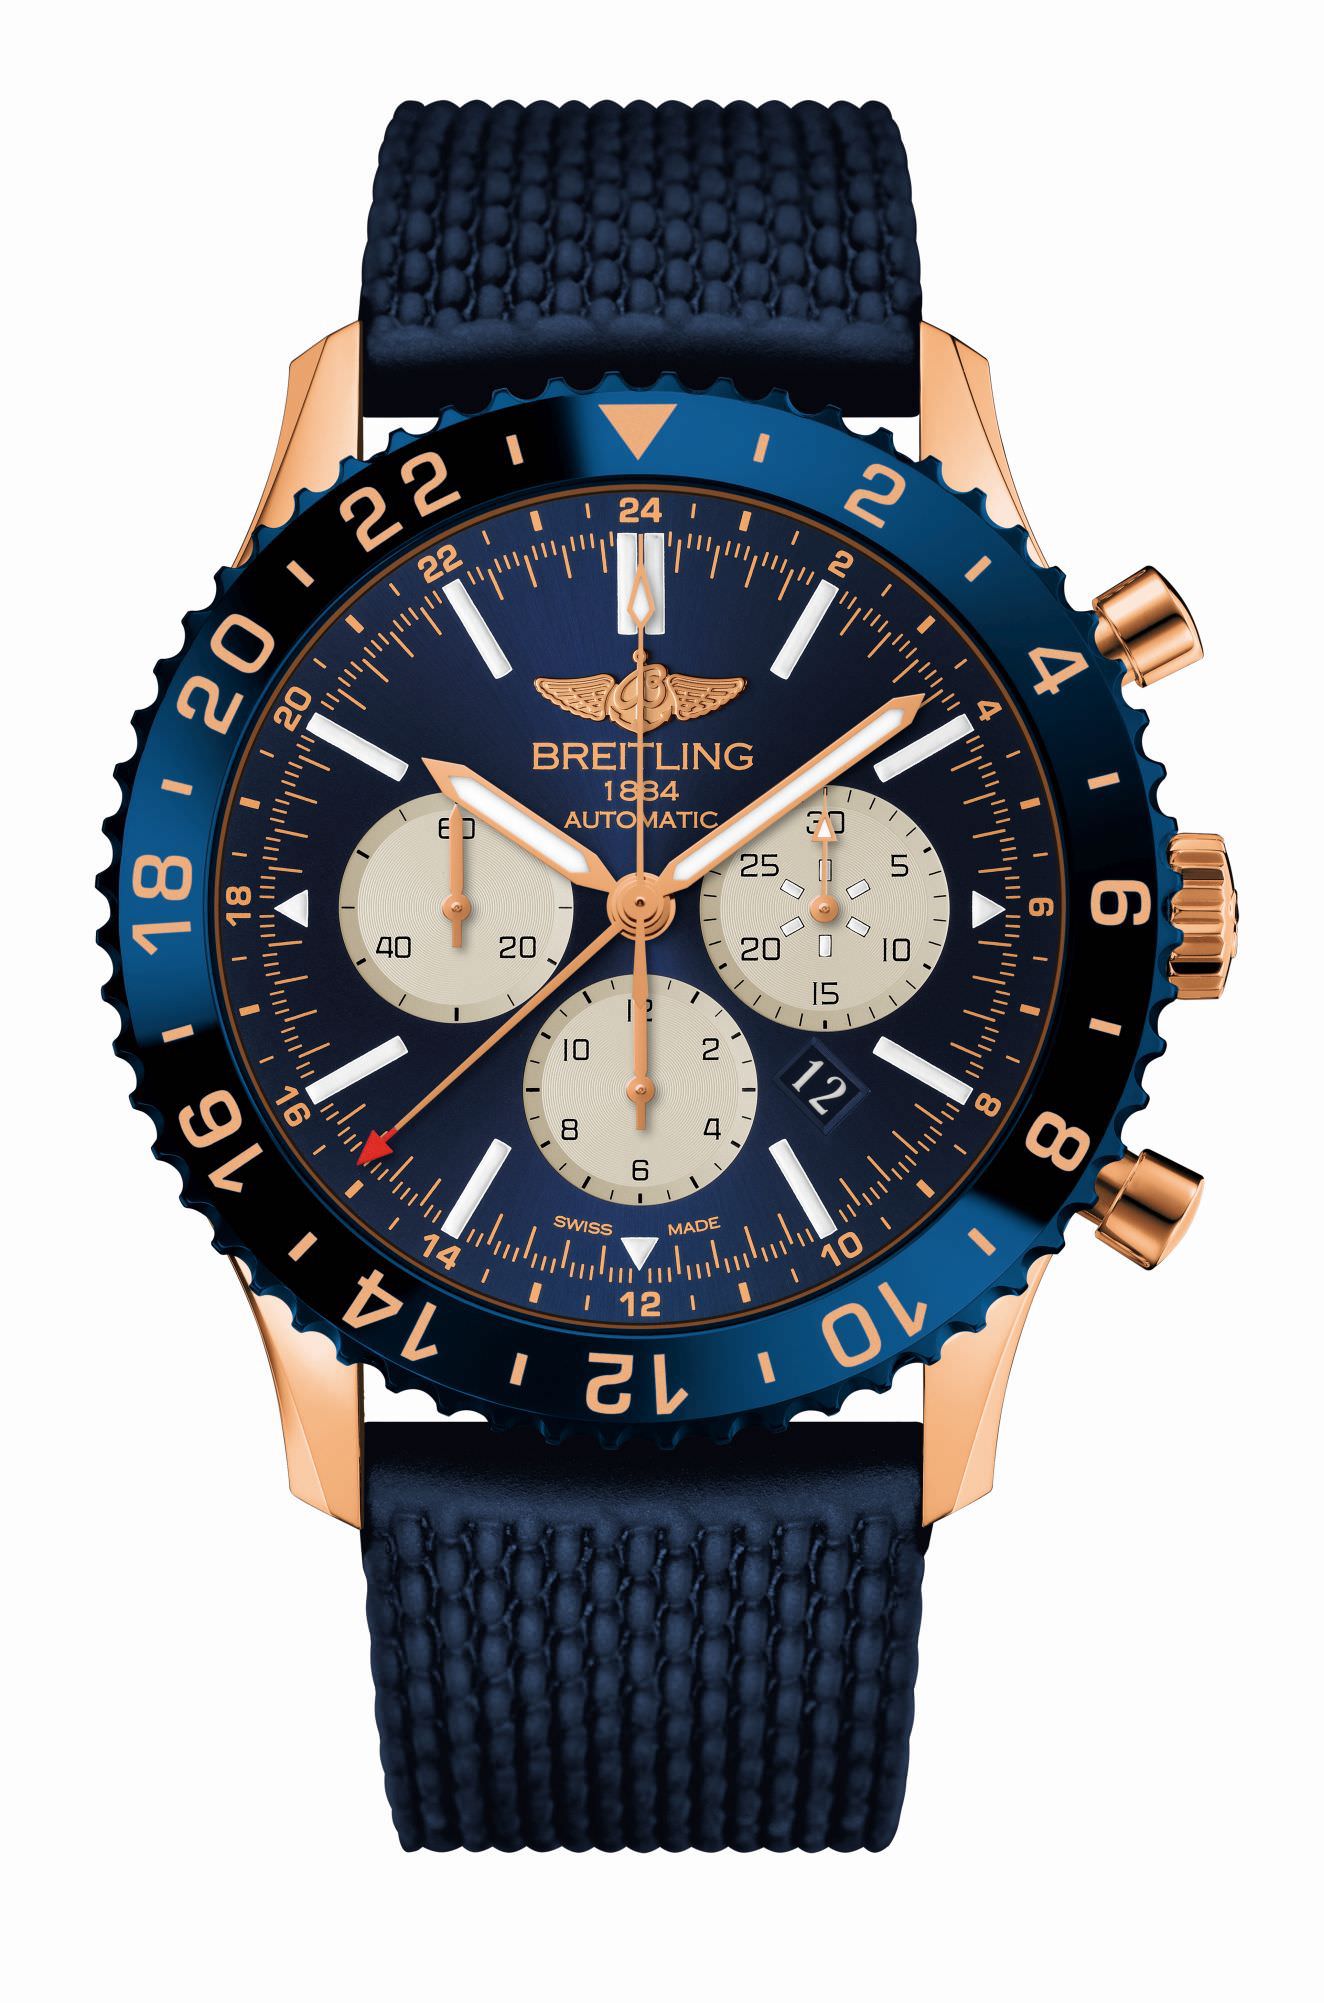 Die Breitling Chronoliner B04 in Rotgold